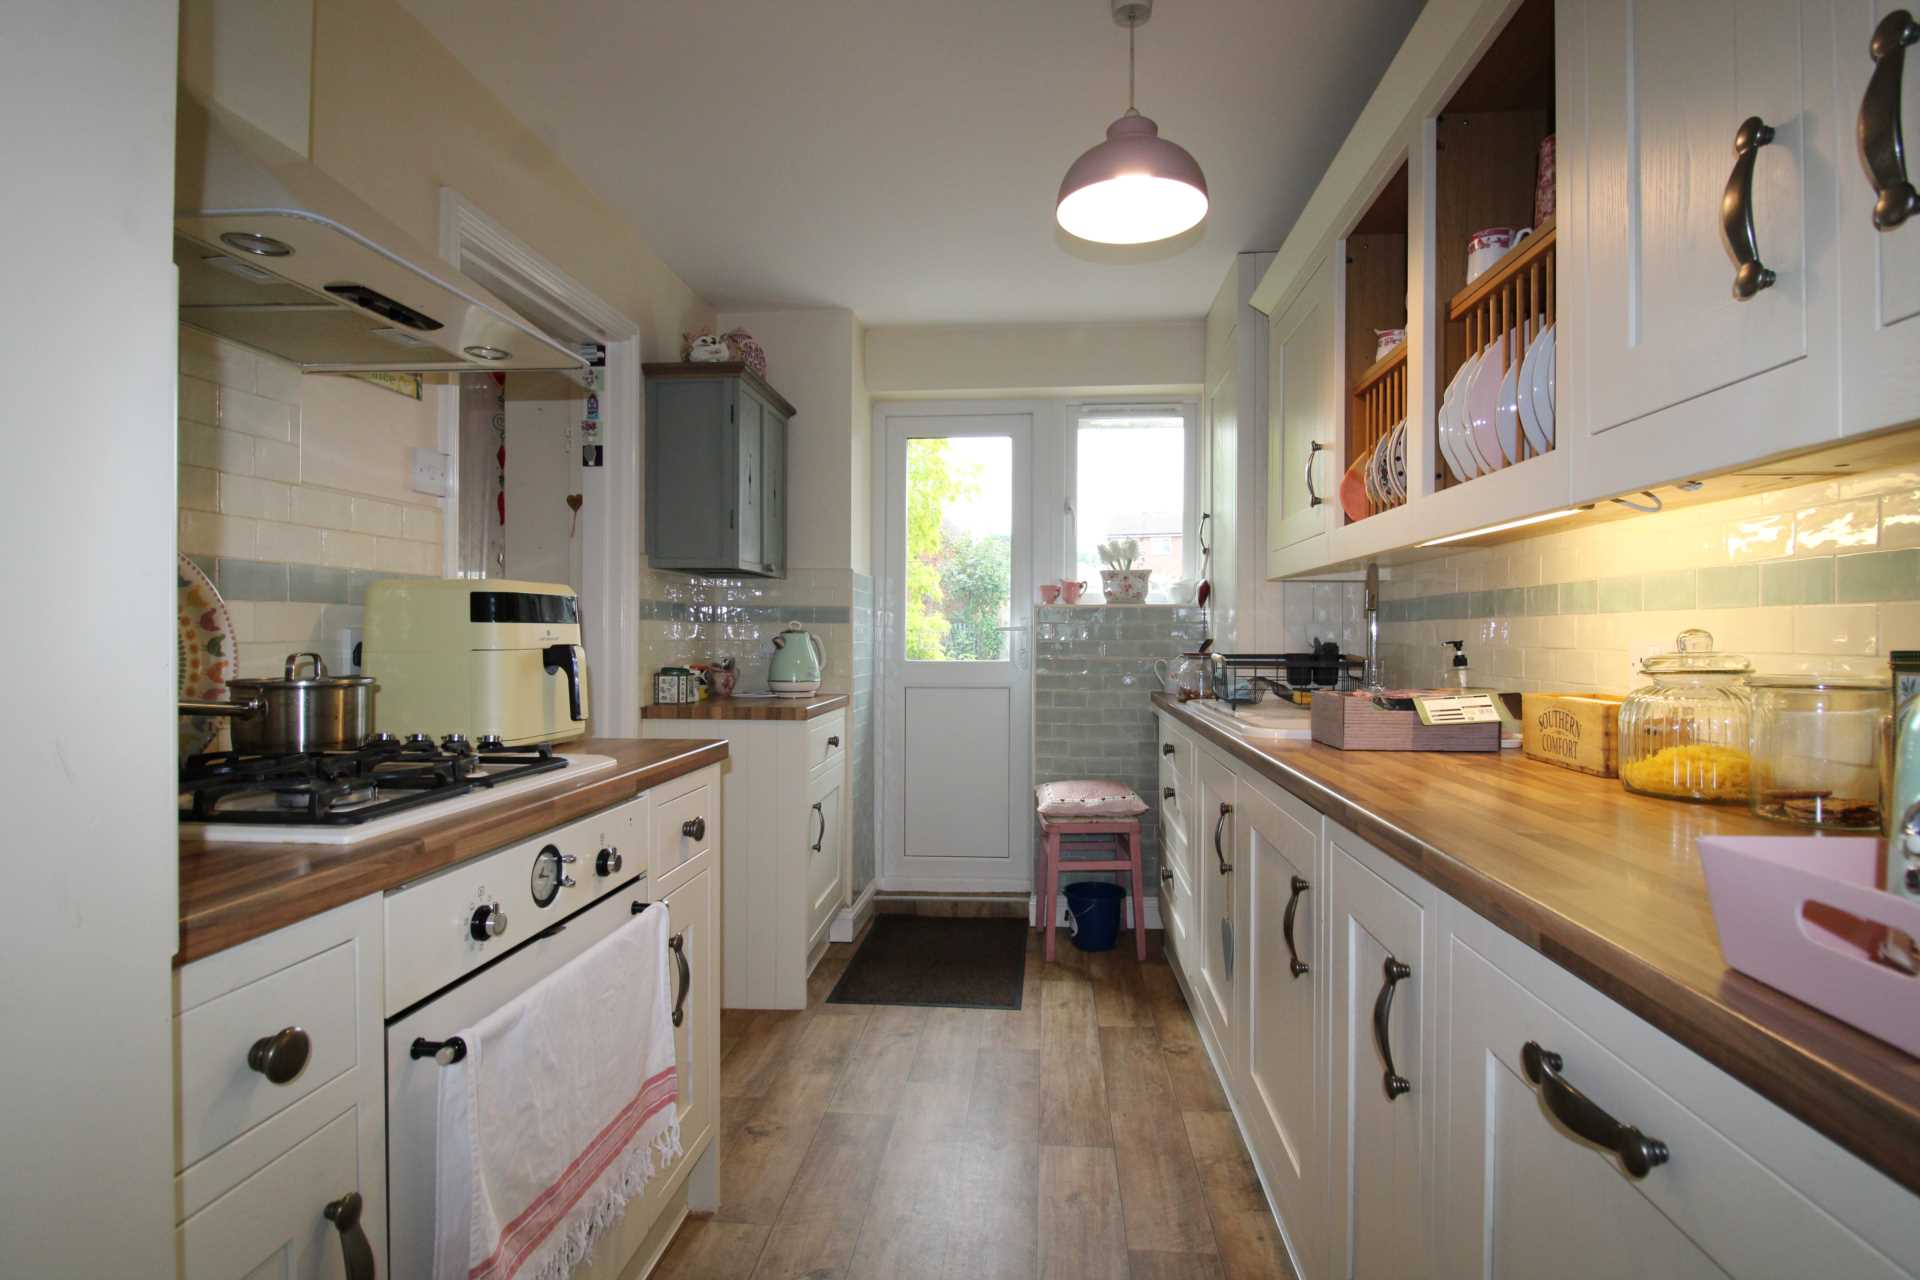 Coningsby Drive, Potters Bar, Image 4